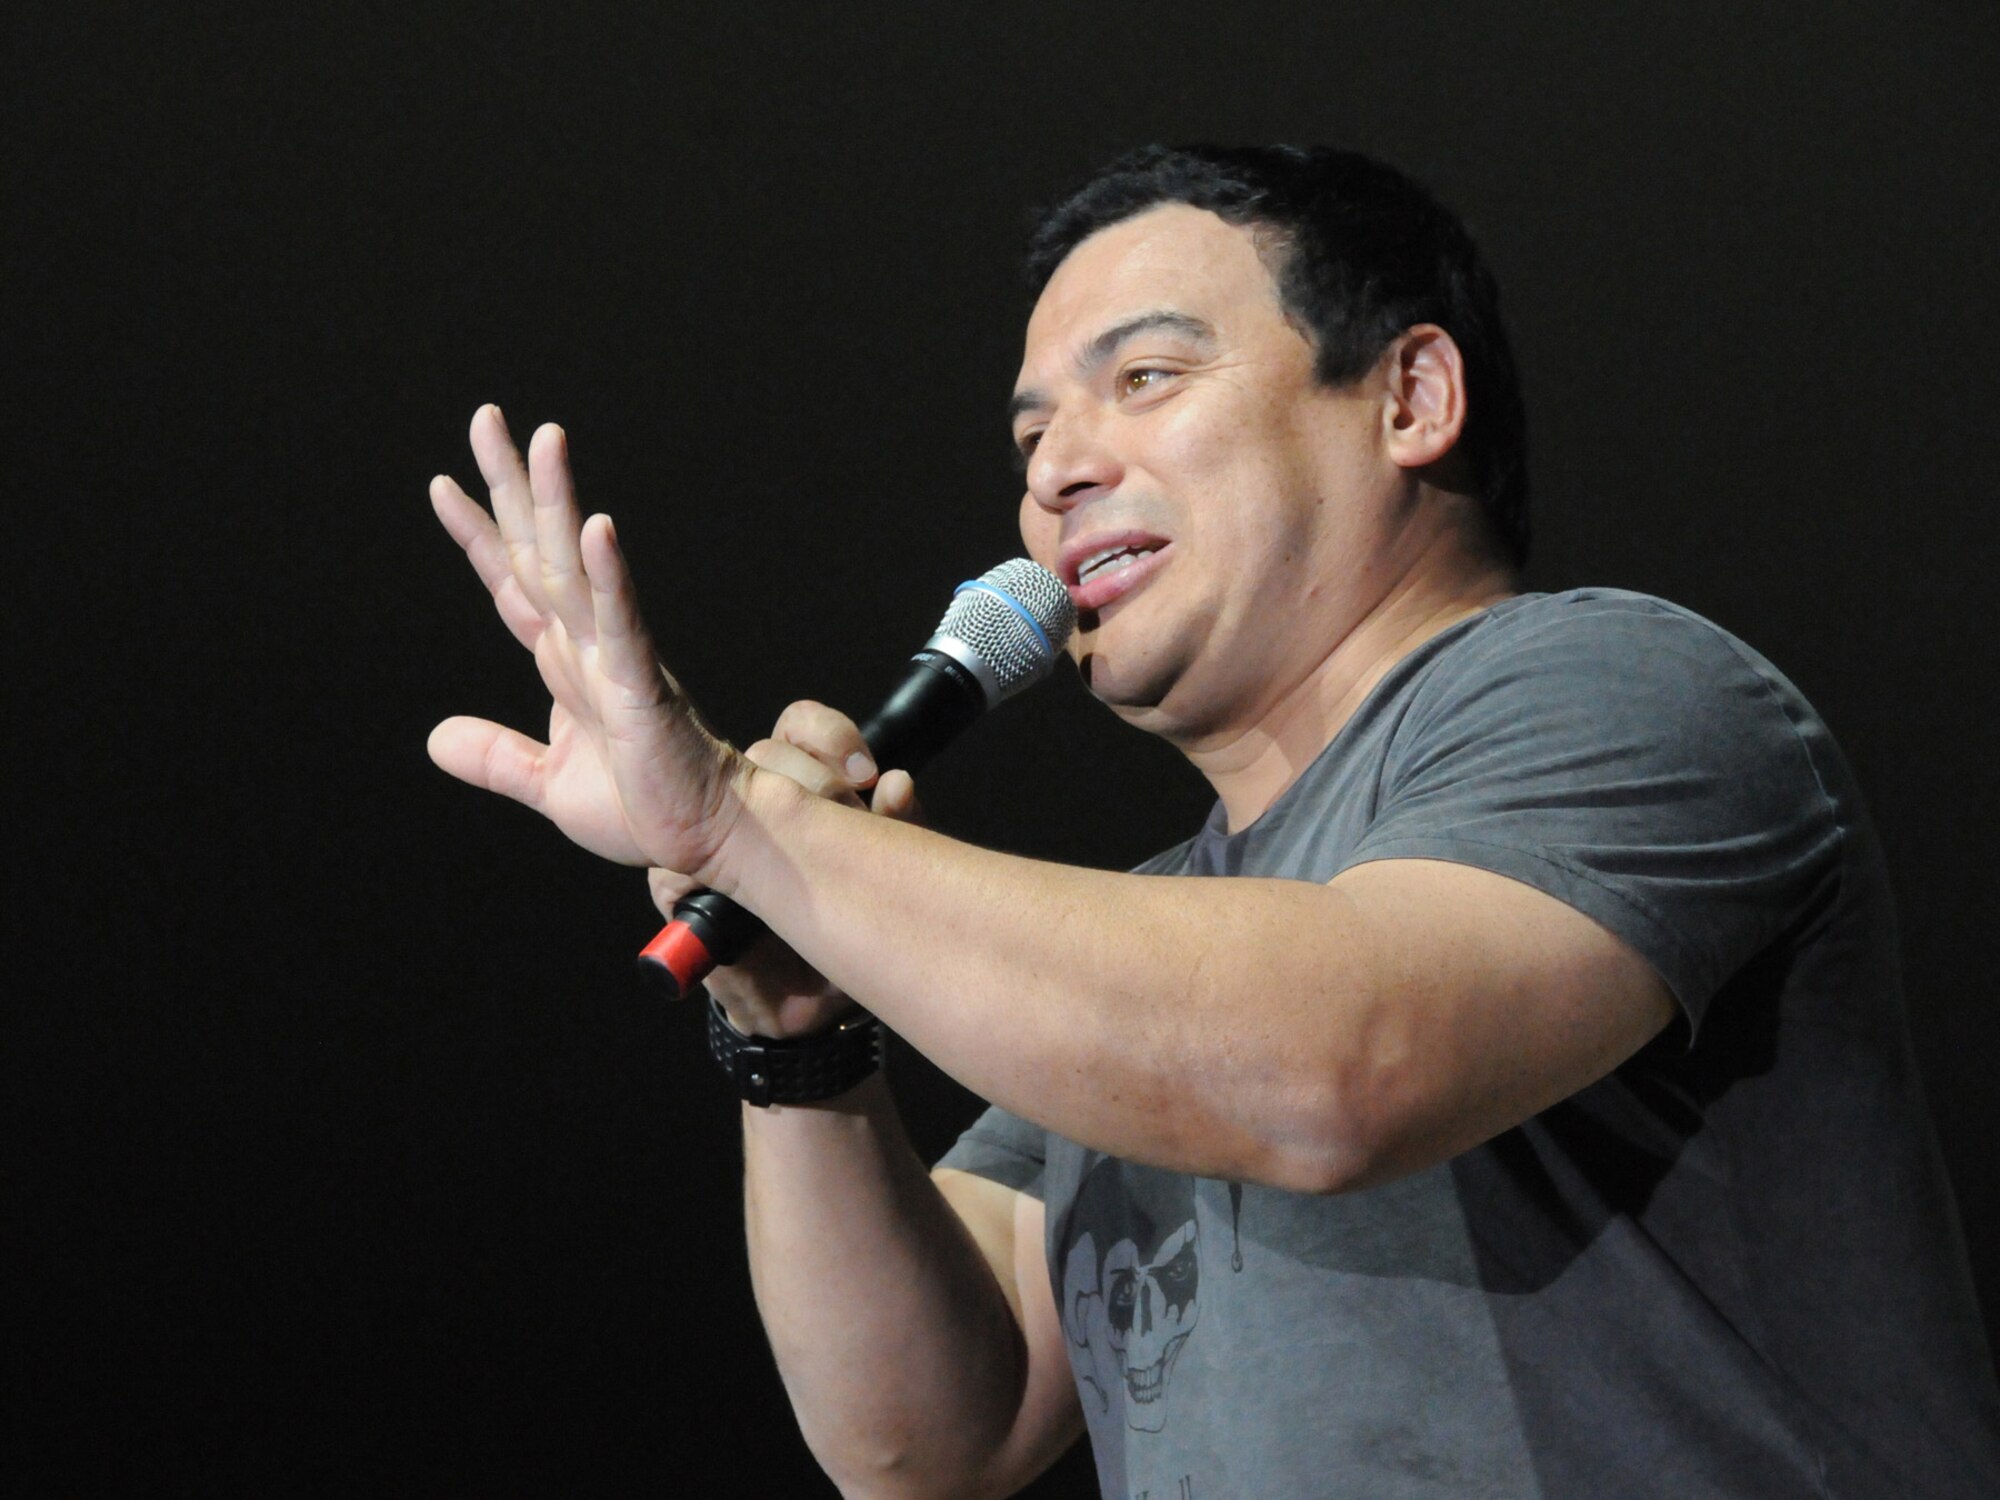 Carlos Mencia performs for a live audience of deployed servicemembers in Southwest Asia, Dec. 6, 2009. Tour for Troops 2009 will visit various deployed locations throughout Southwest Asia and Europe and is sponsored by the U.S. Air Force Reserve Command. (U.S. Air Force Photo/Tech Sgt. Jason W. Edwards)